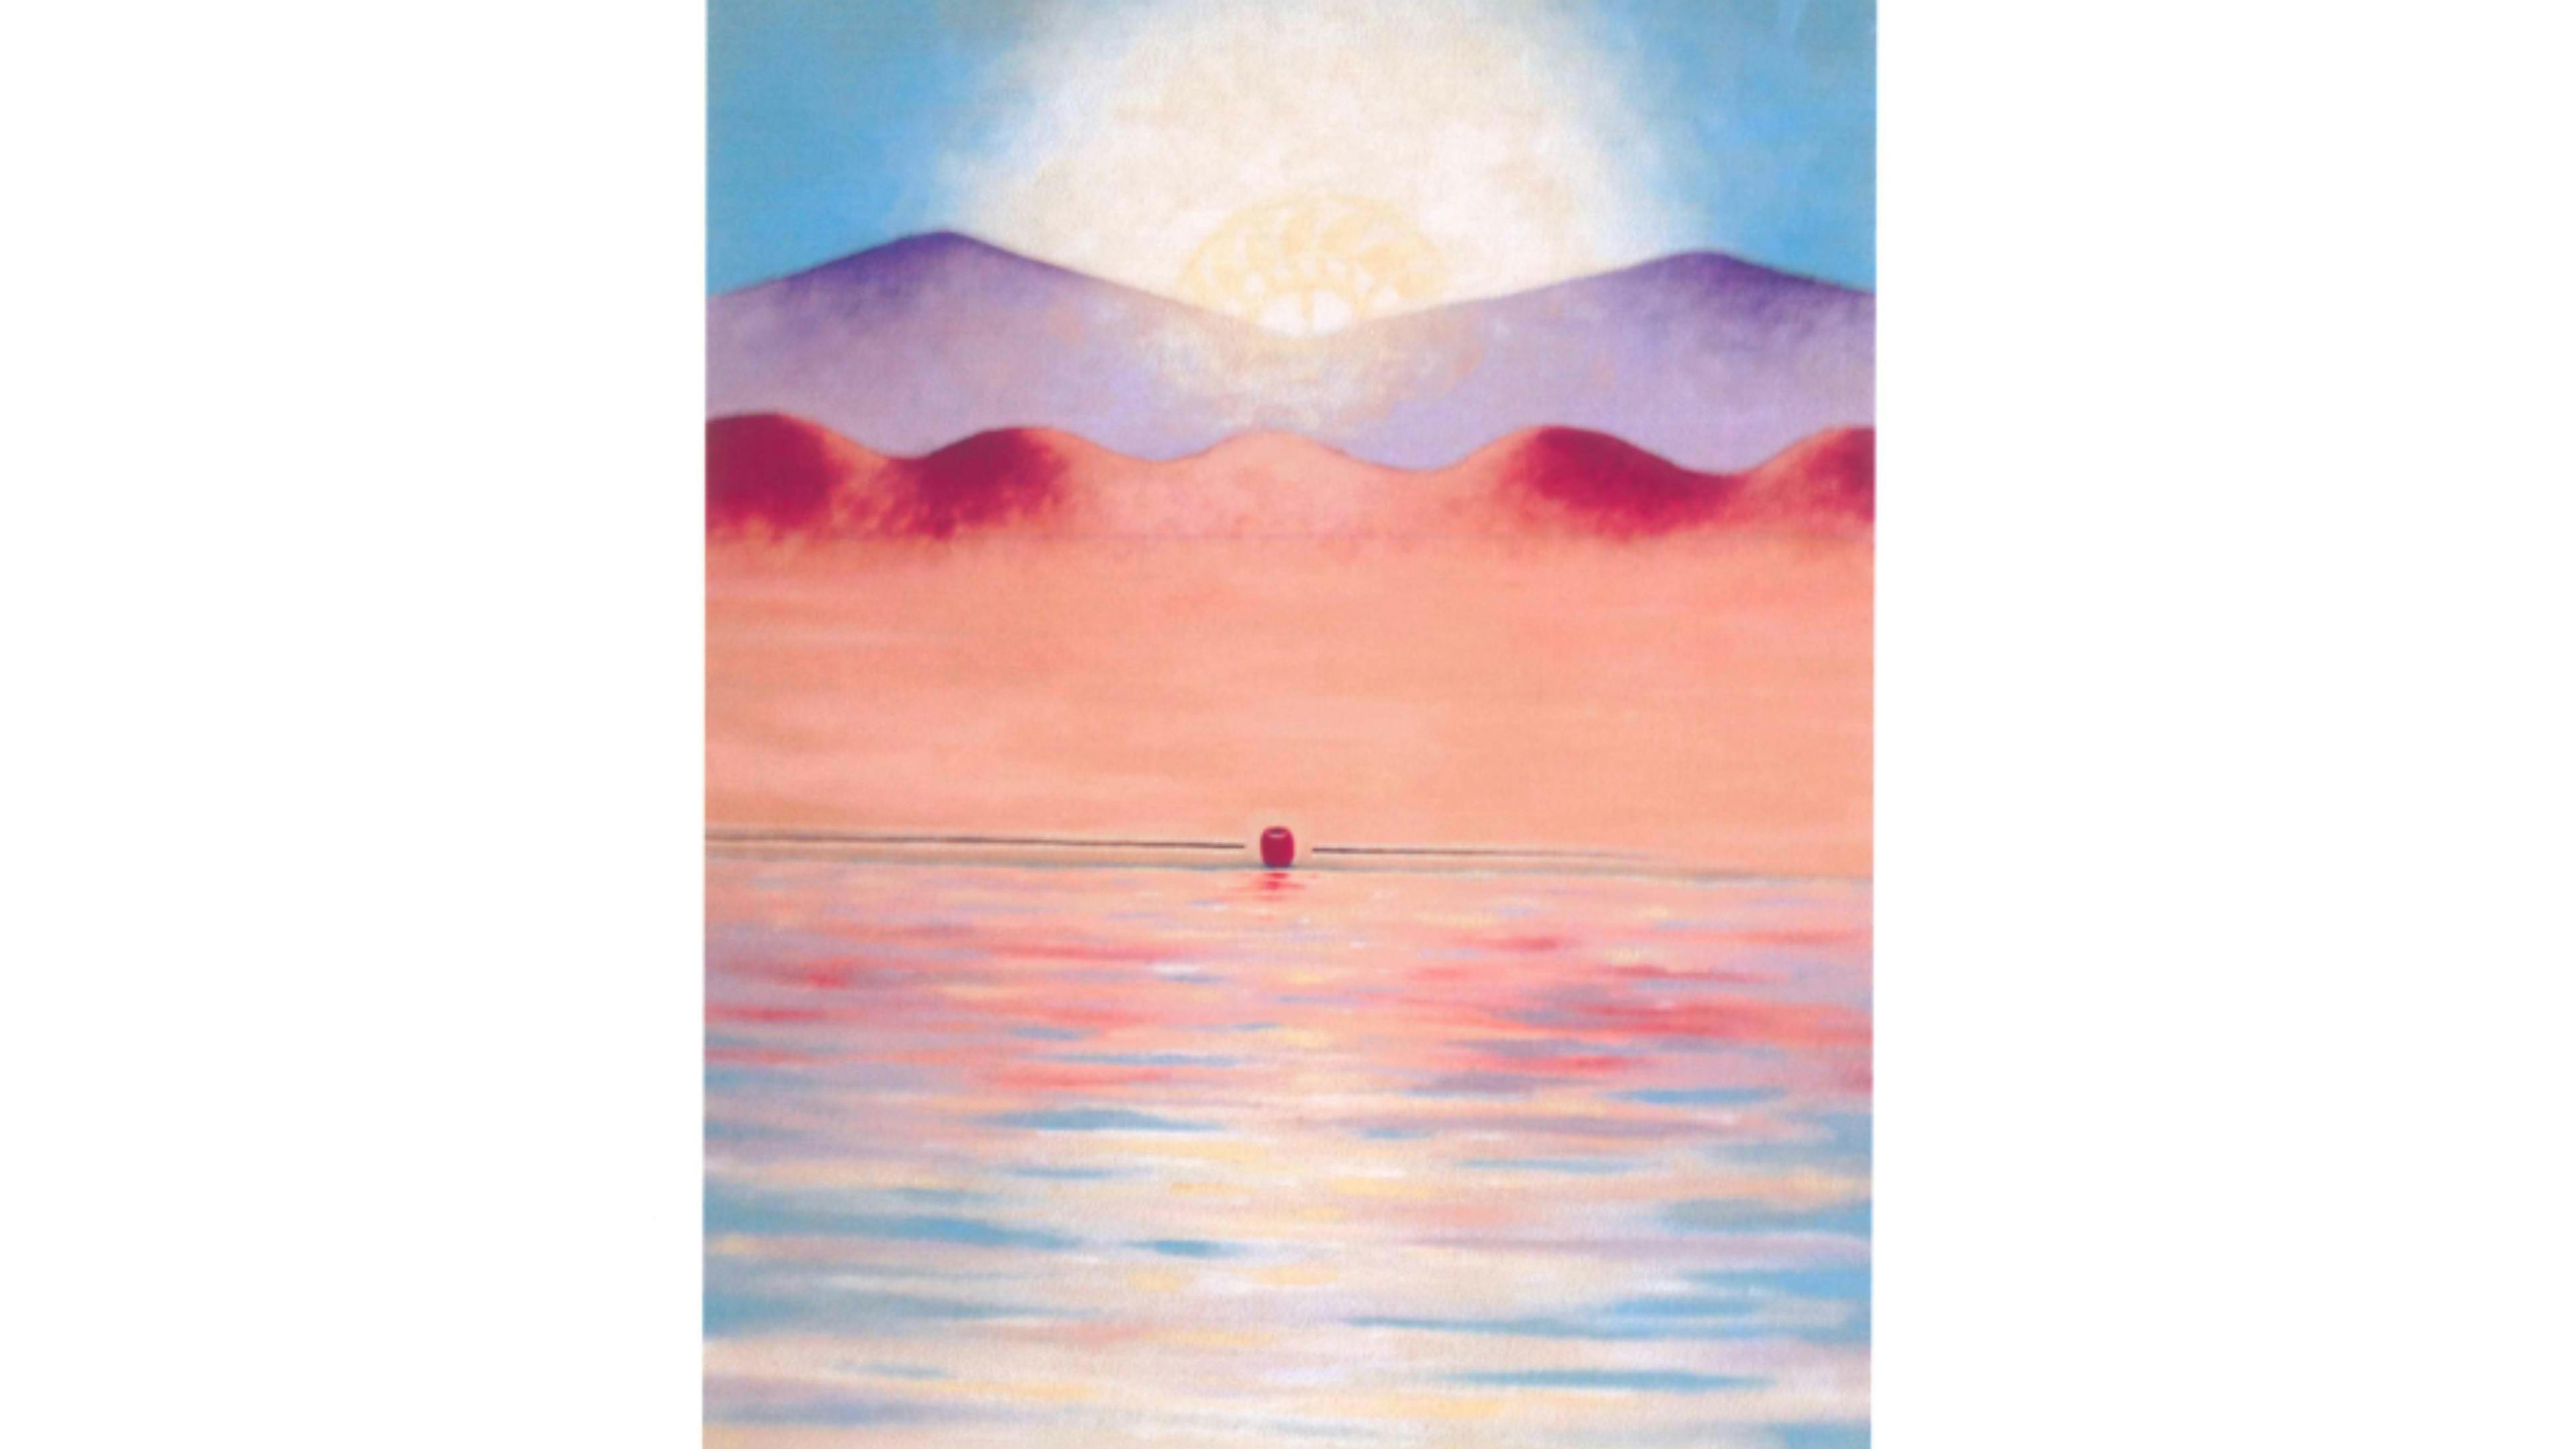 Peaceful and warm southwestern scene with calm blue and pink waters, with red and purple mountains and a bright sun with a blue sky. Along the horizon the red bead sits with the path slowly coming to taper into nothing. 